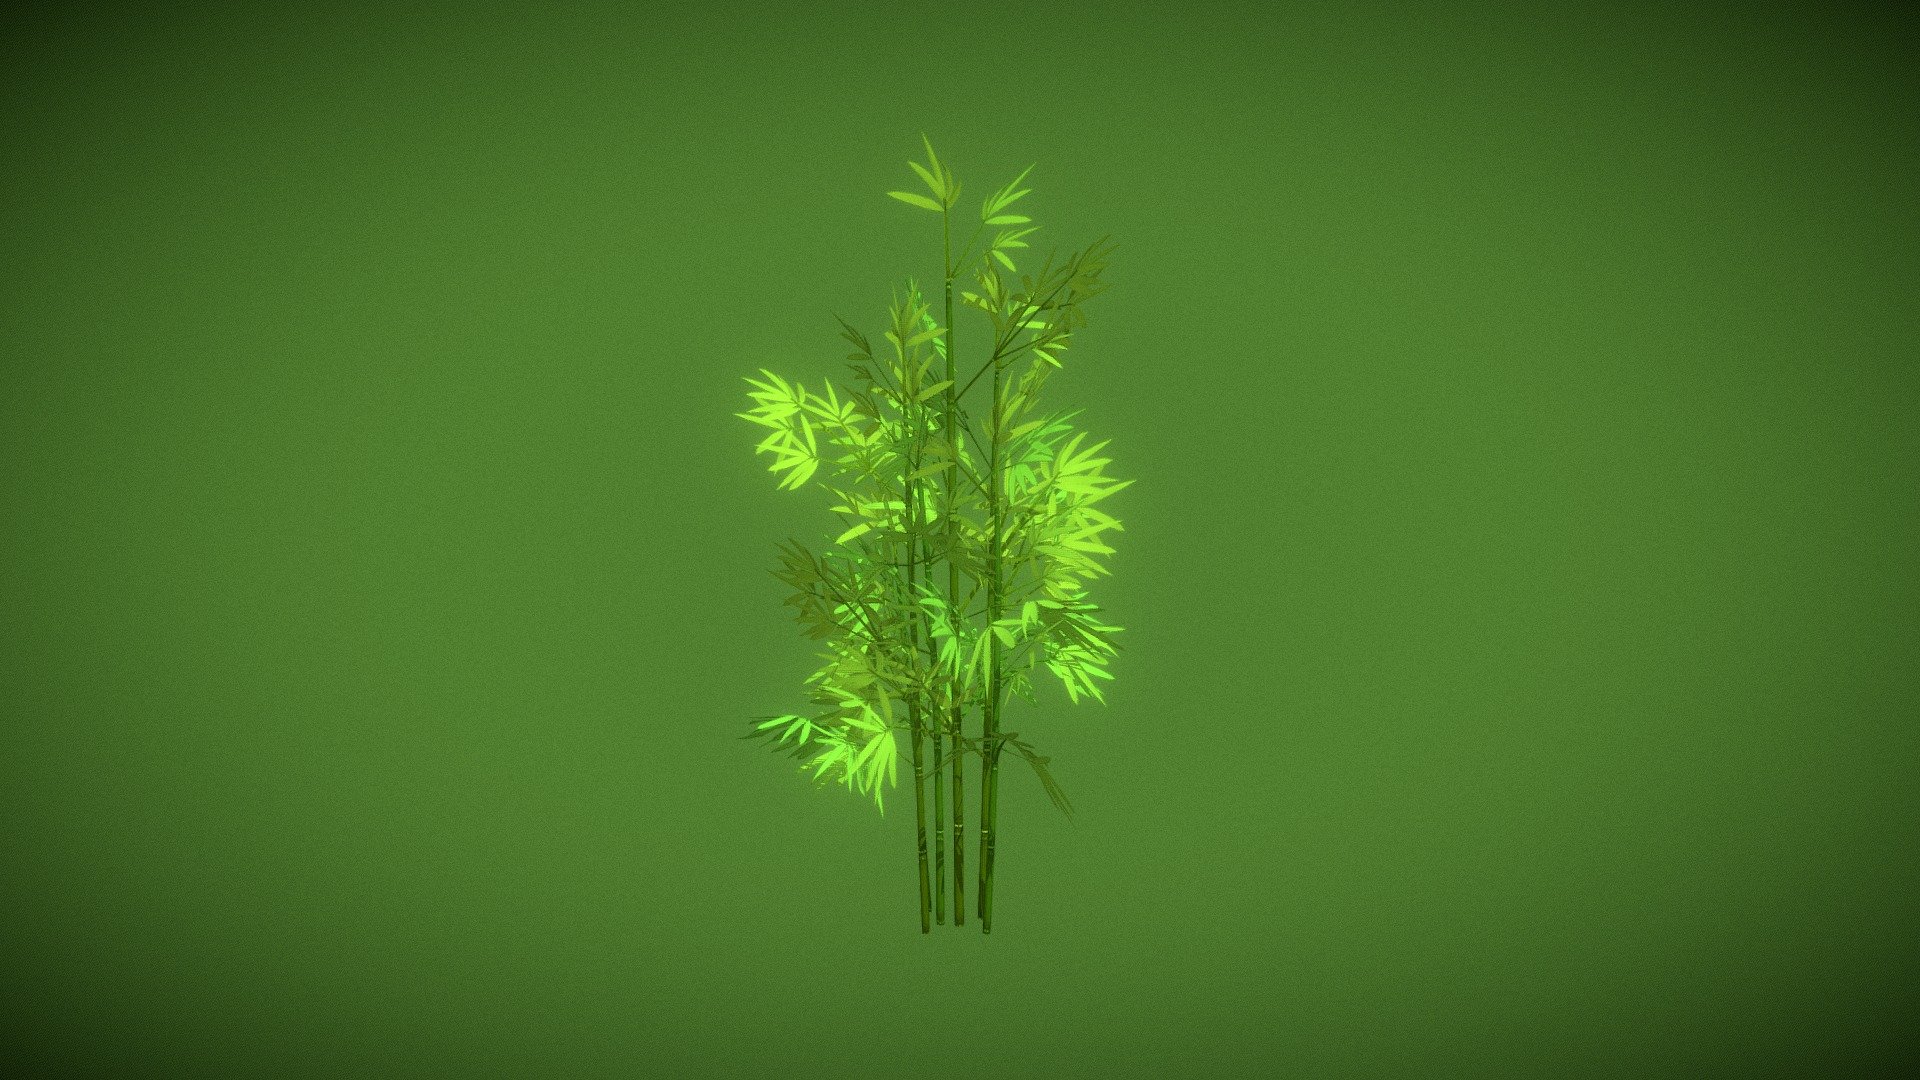 low poly stylized bamboo bush. Feel free to use how you like it.
Please leave a like or comment if you like my stuff 3d model